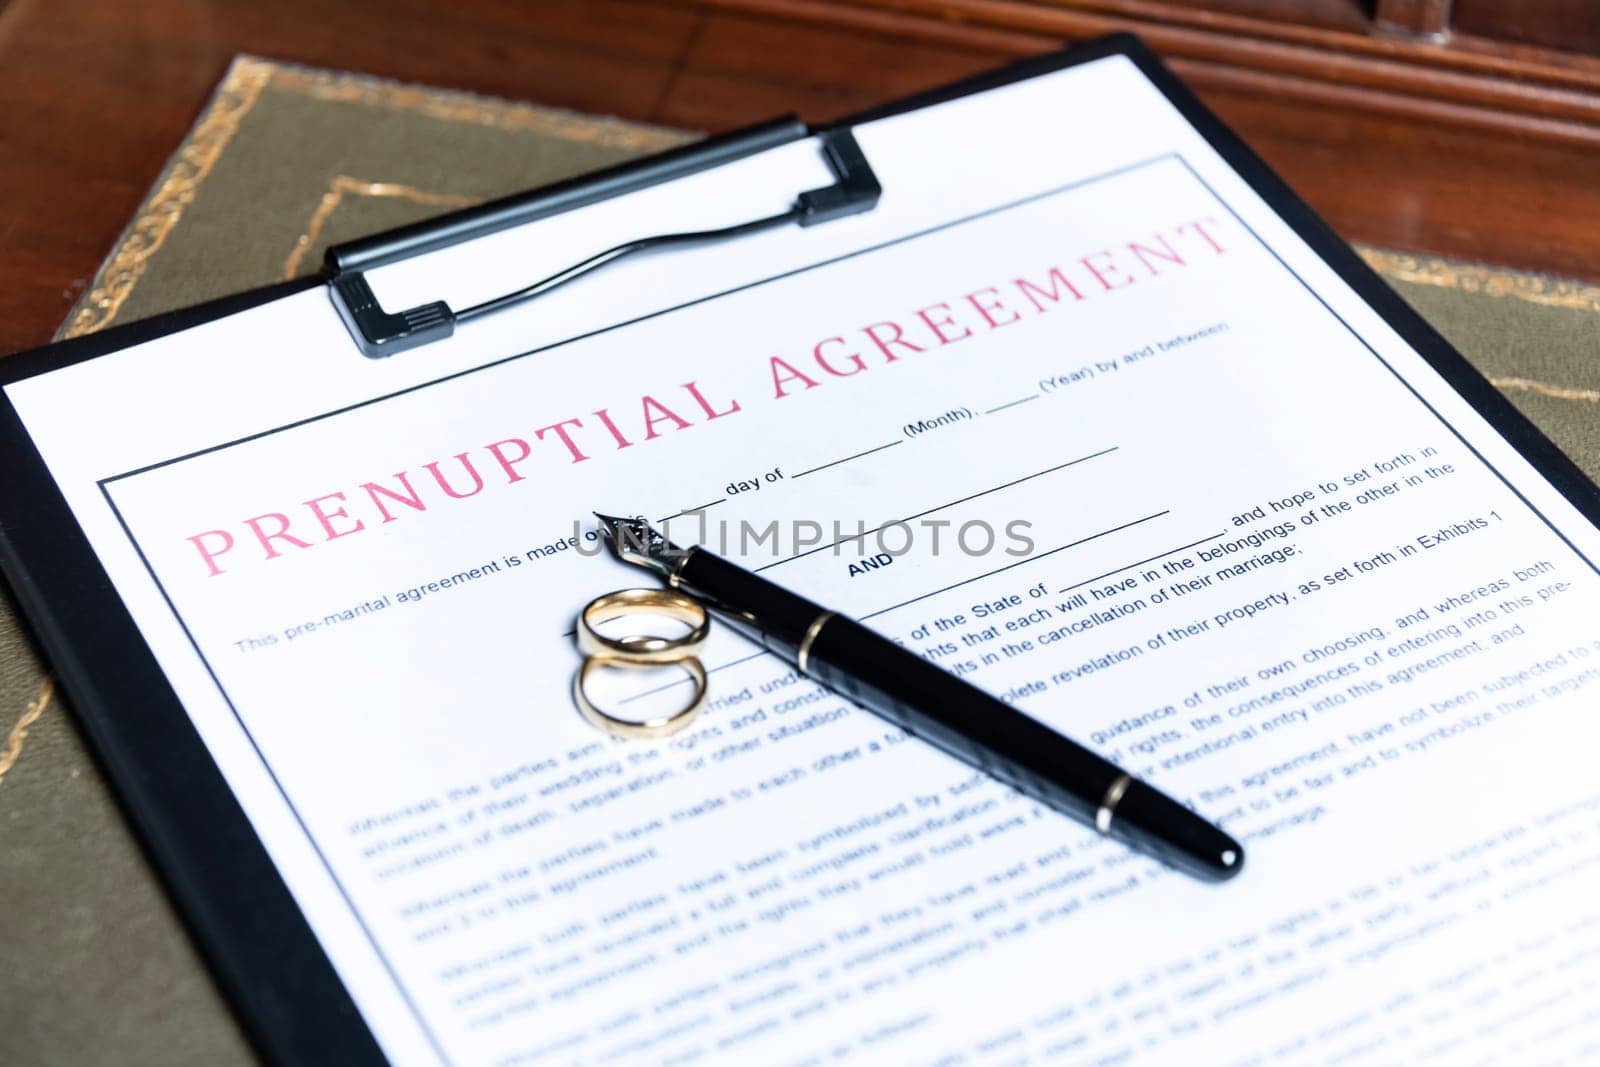 Close-up of a prenuptial agreement form with wedding rings and a fountain pen, indicating the legal aspects of marriage preparation. by jbruiz78